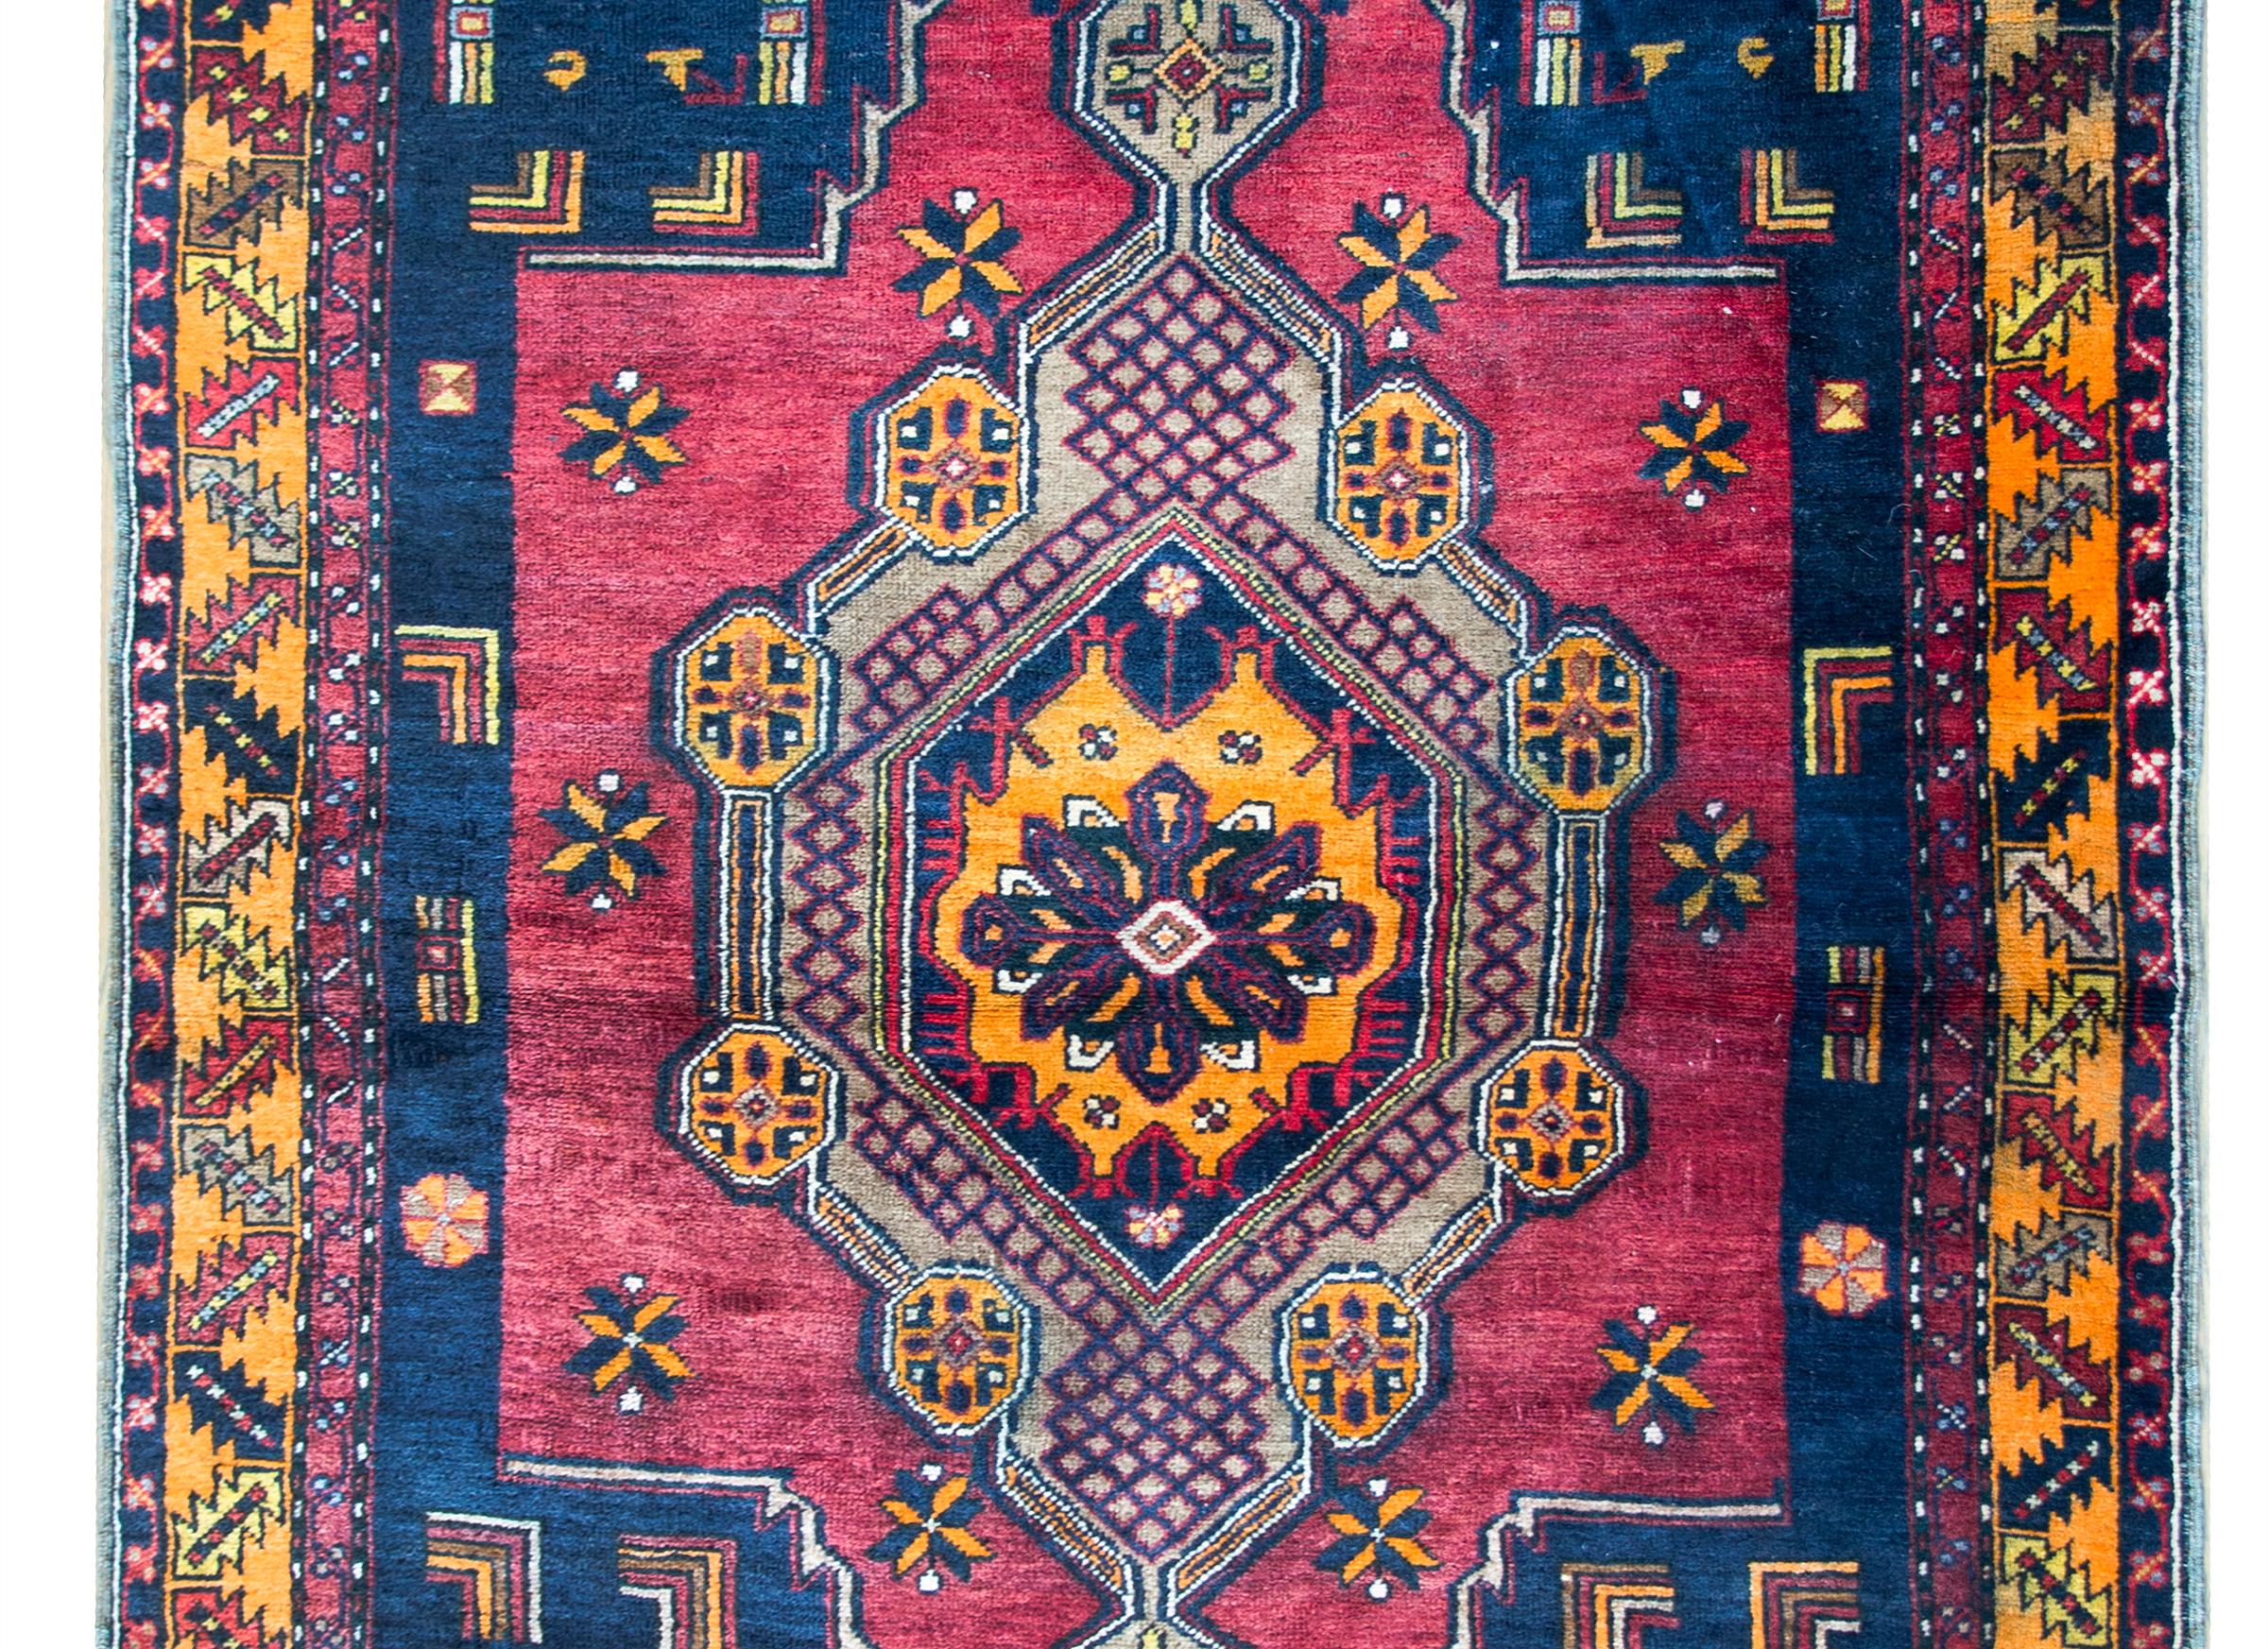 A beautiful mid-20th century Afghani Baluch rug with tribal pattern consisting of a large central floral medallion circled by another diamond medallion with more stylized floral motifs, and living amidst a field of geometric designs. The border is